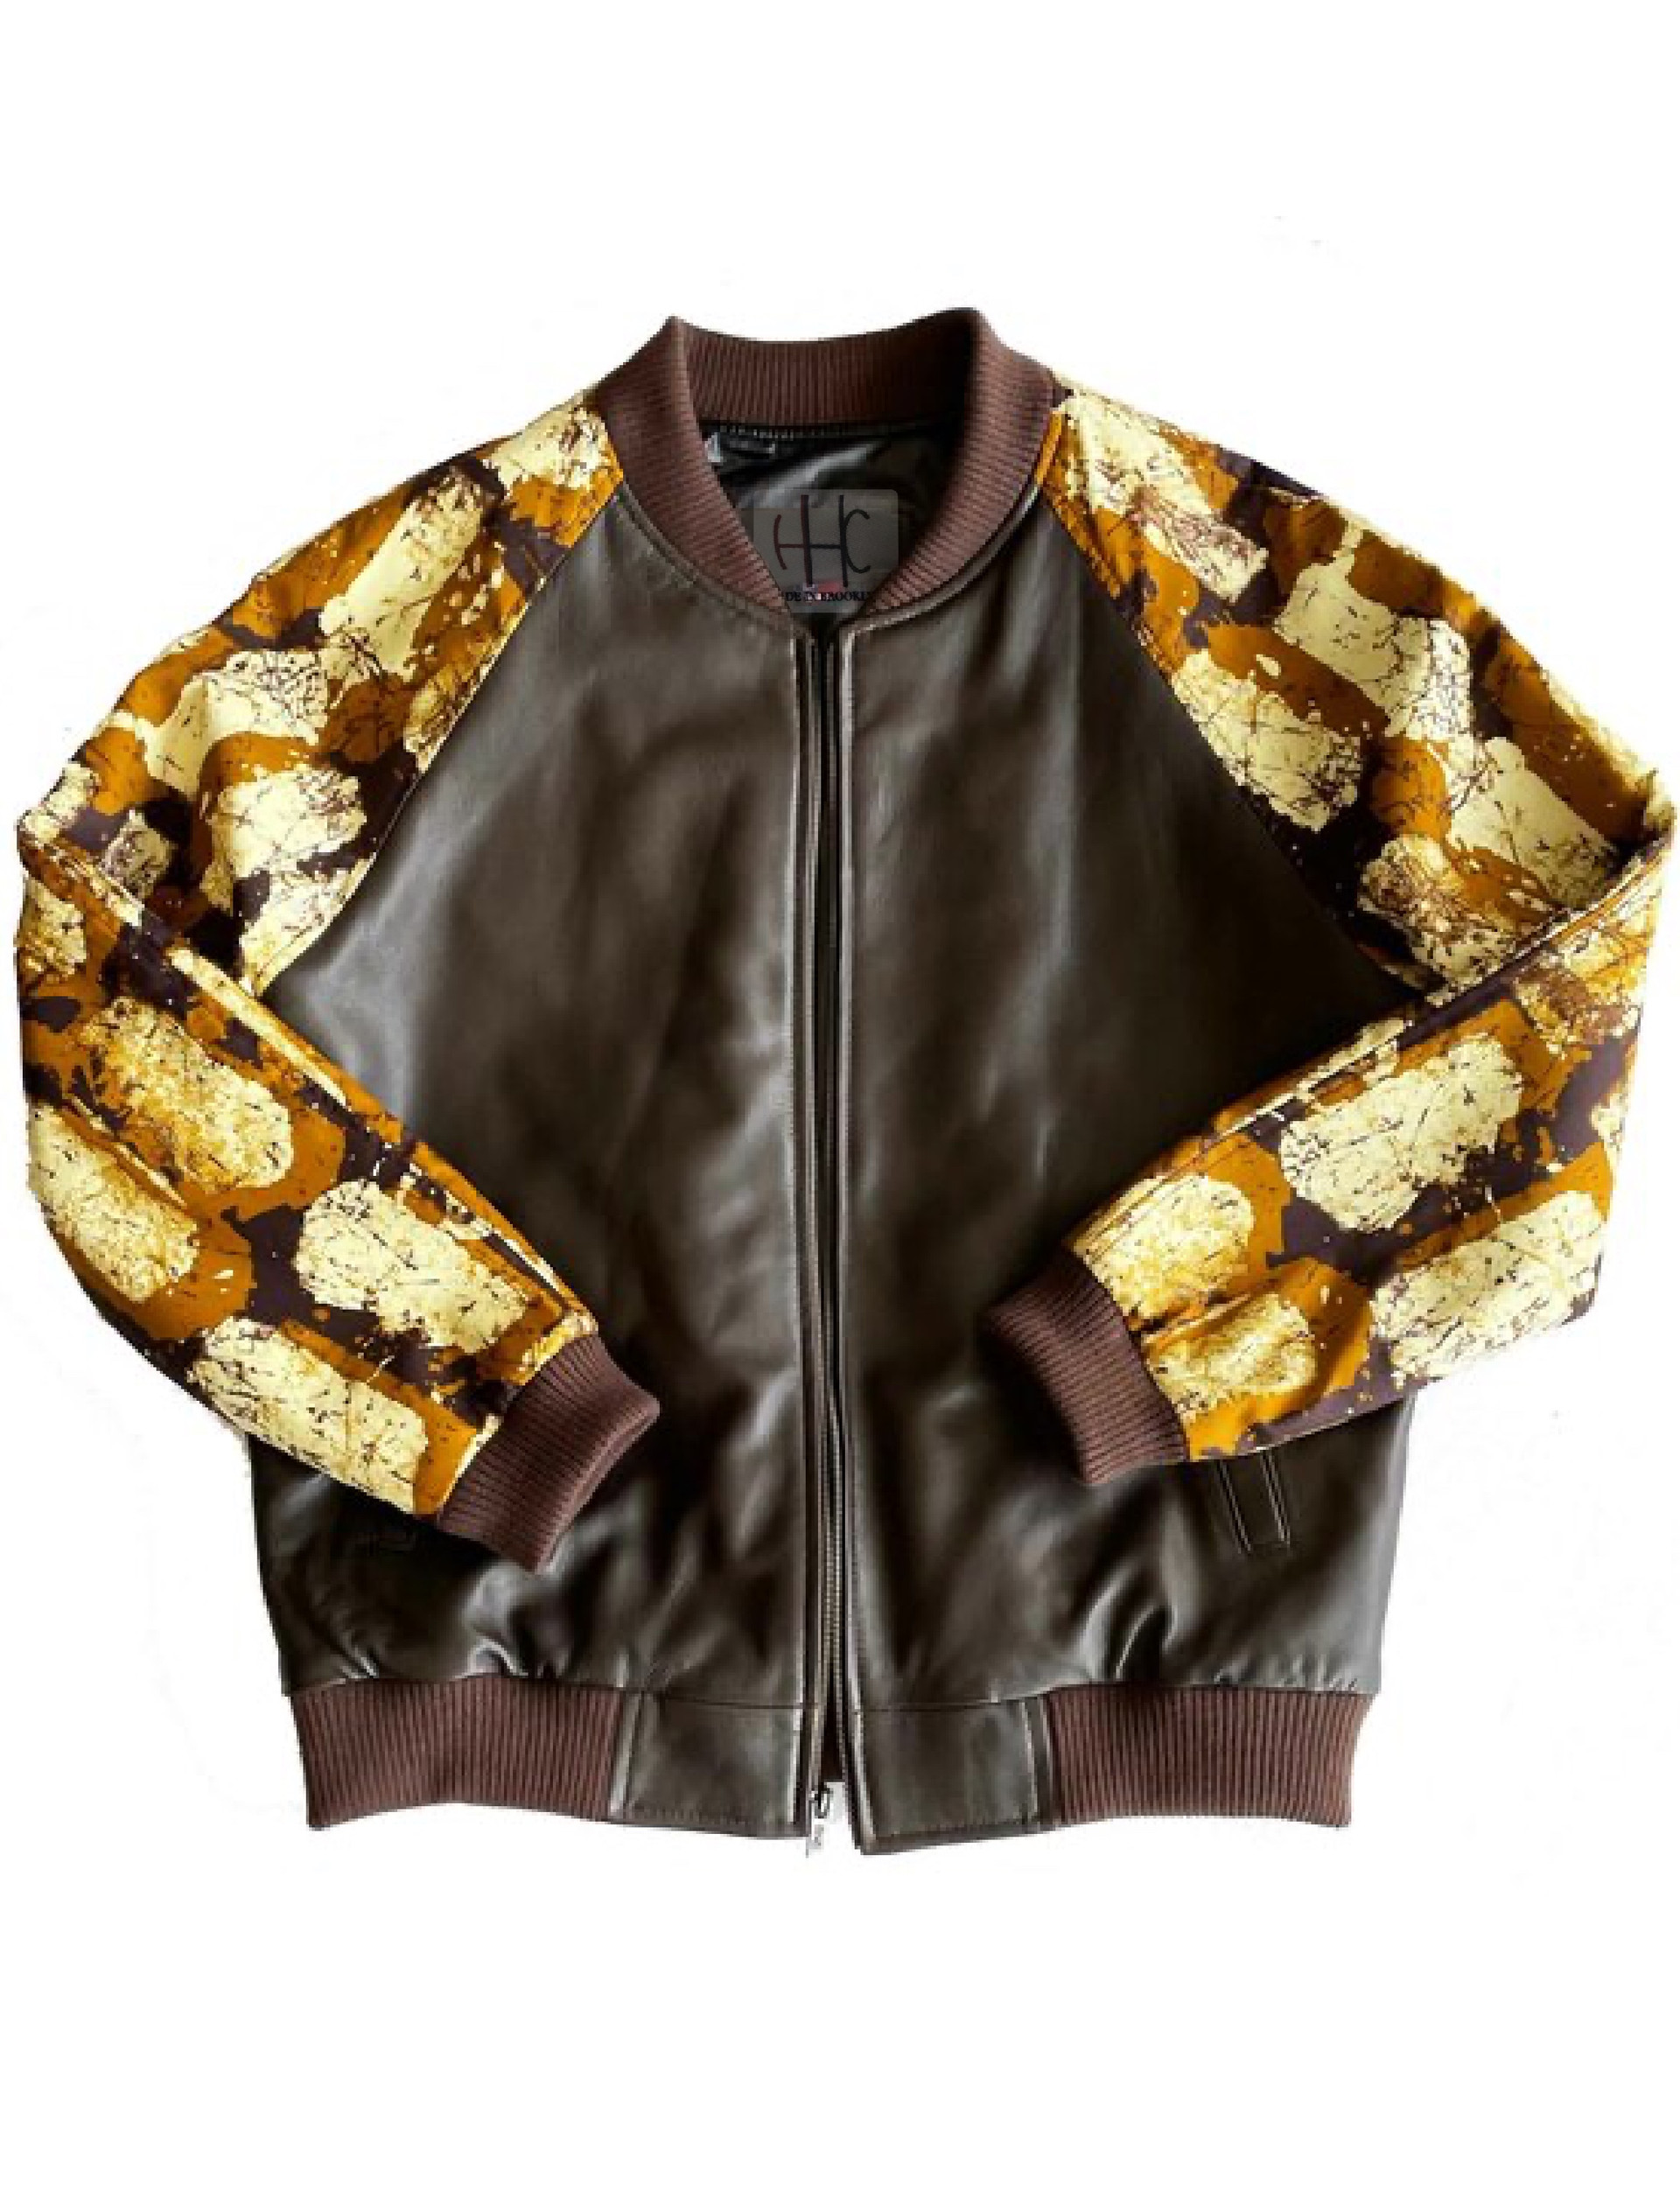 best mens winter coats leather jackets | HipHopCloset.com - Page 2